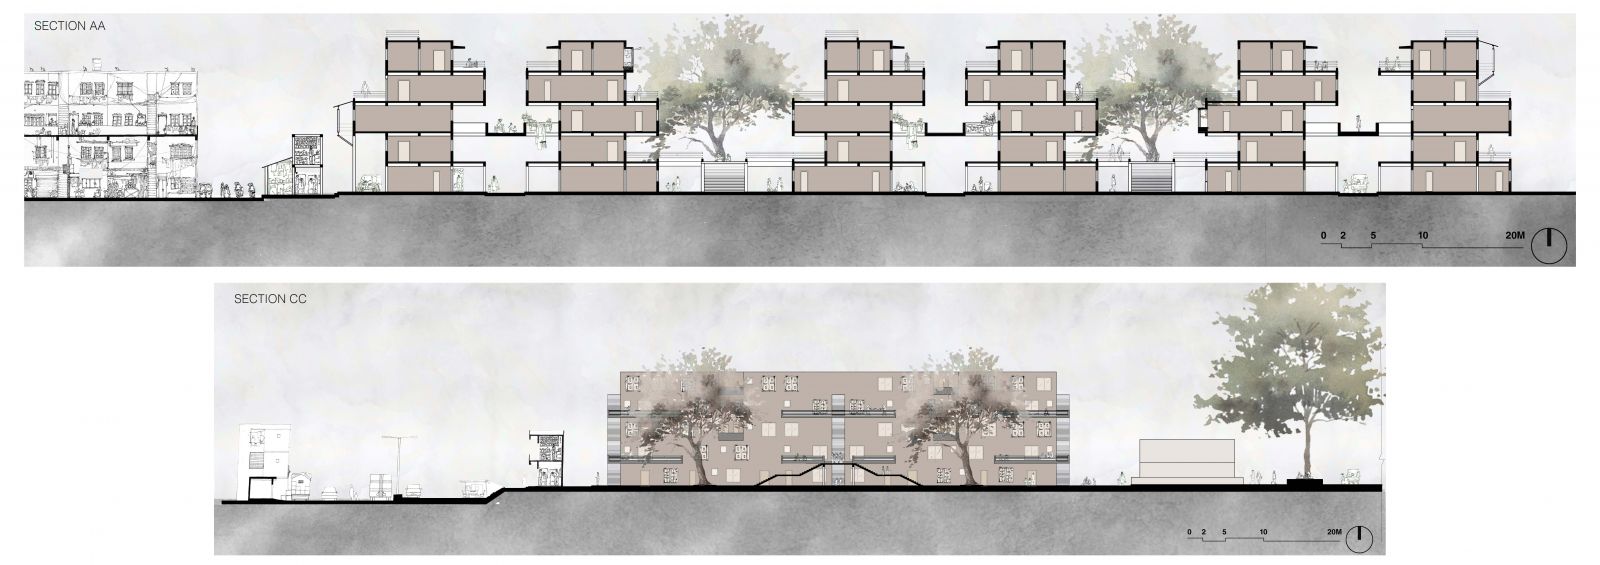 housing projects thesis